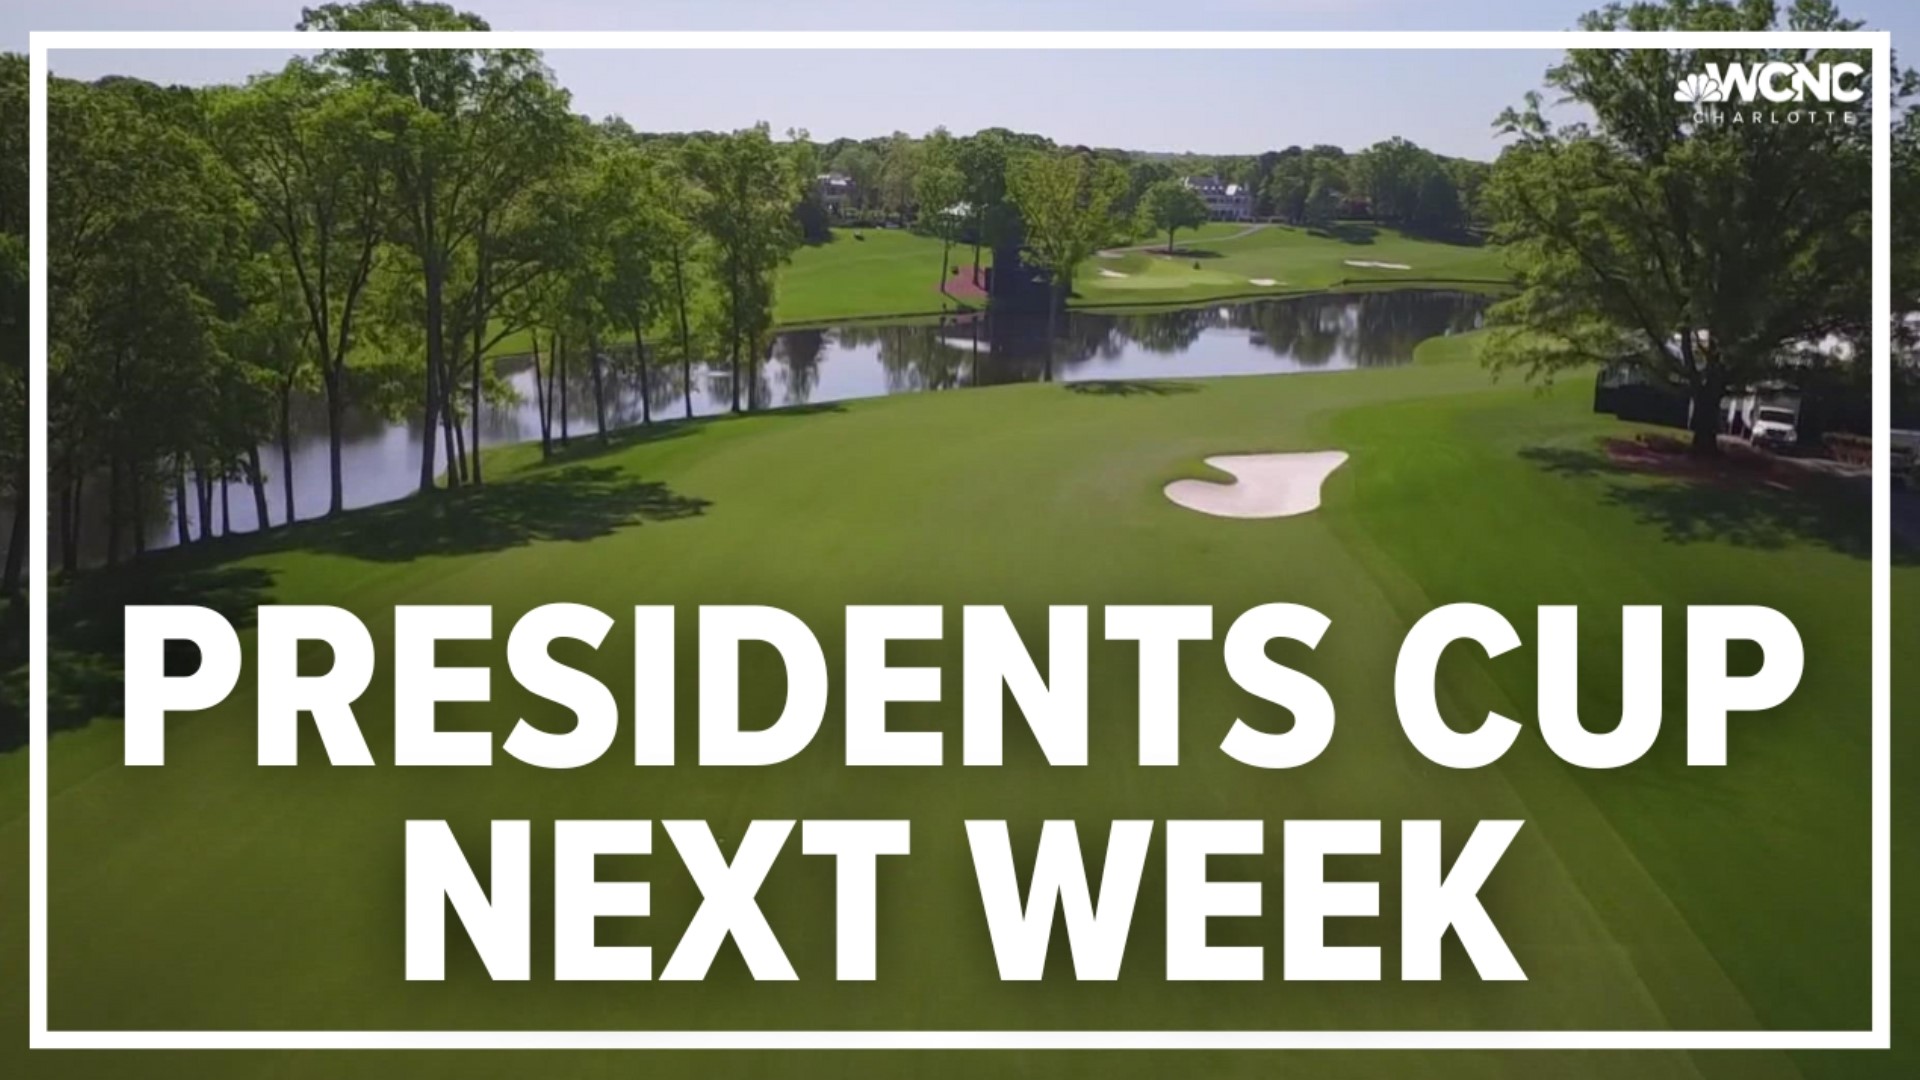 The Presidents Cup will feature two dozen of the best golfers in the world as the United States is pitted up against a team of international players.